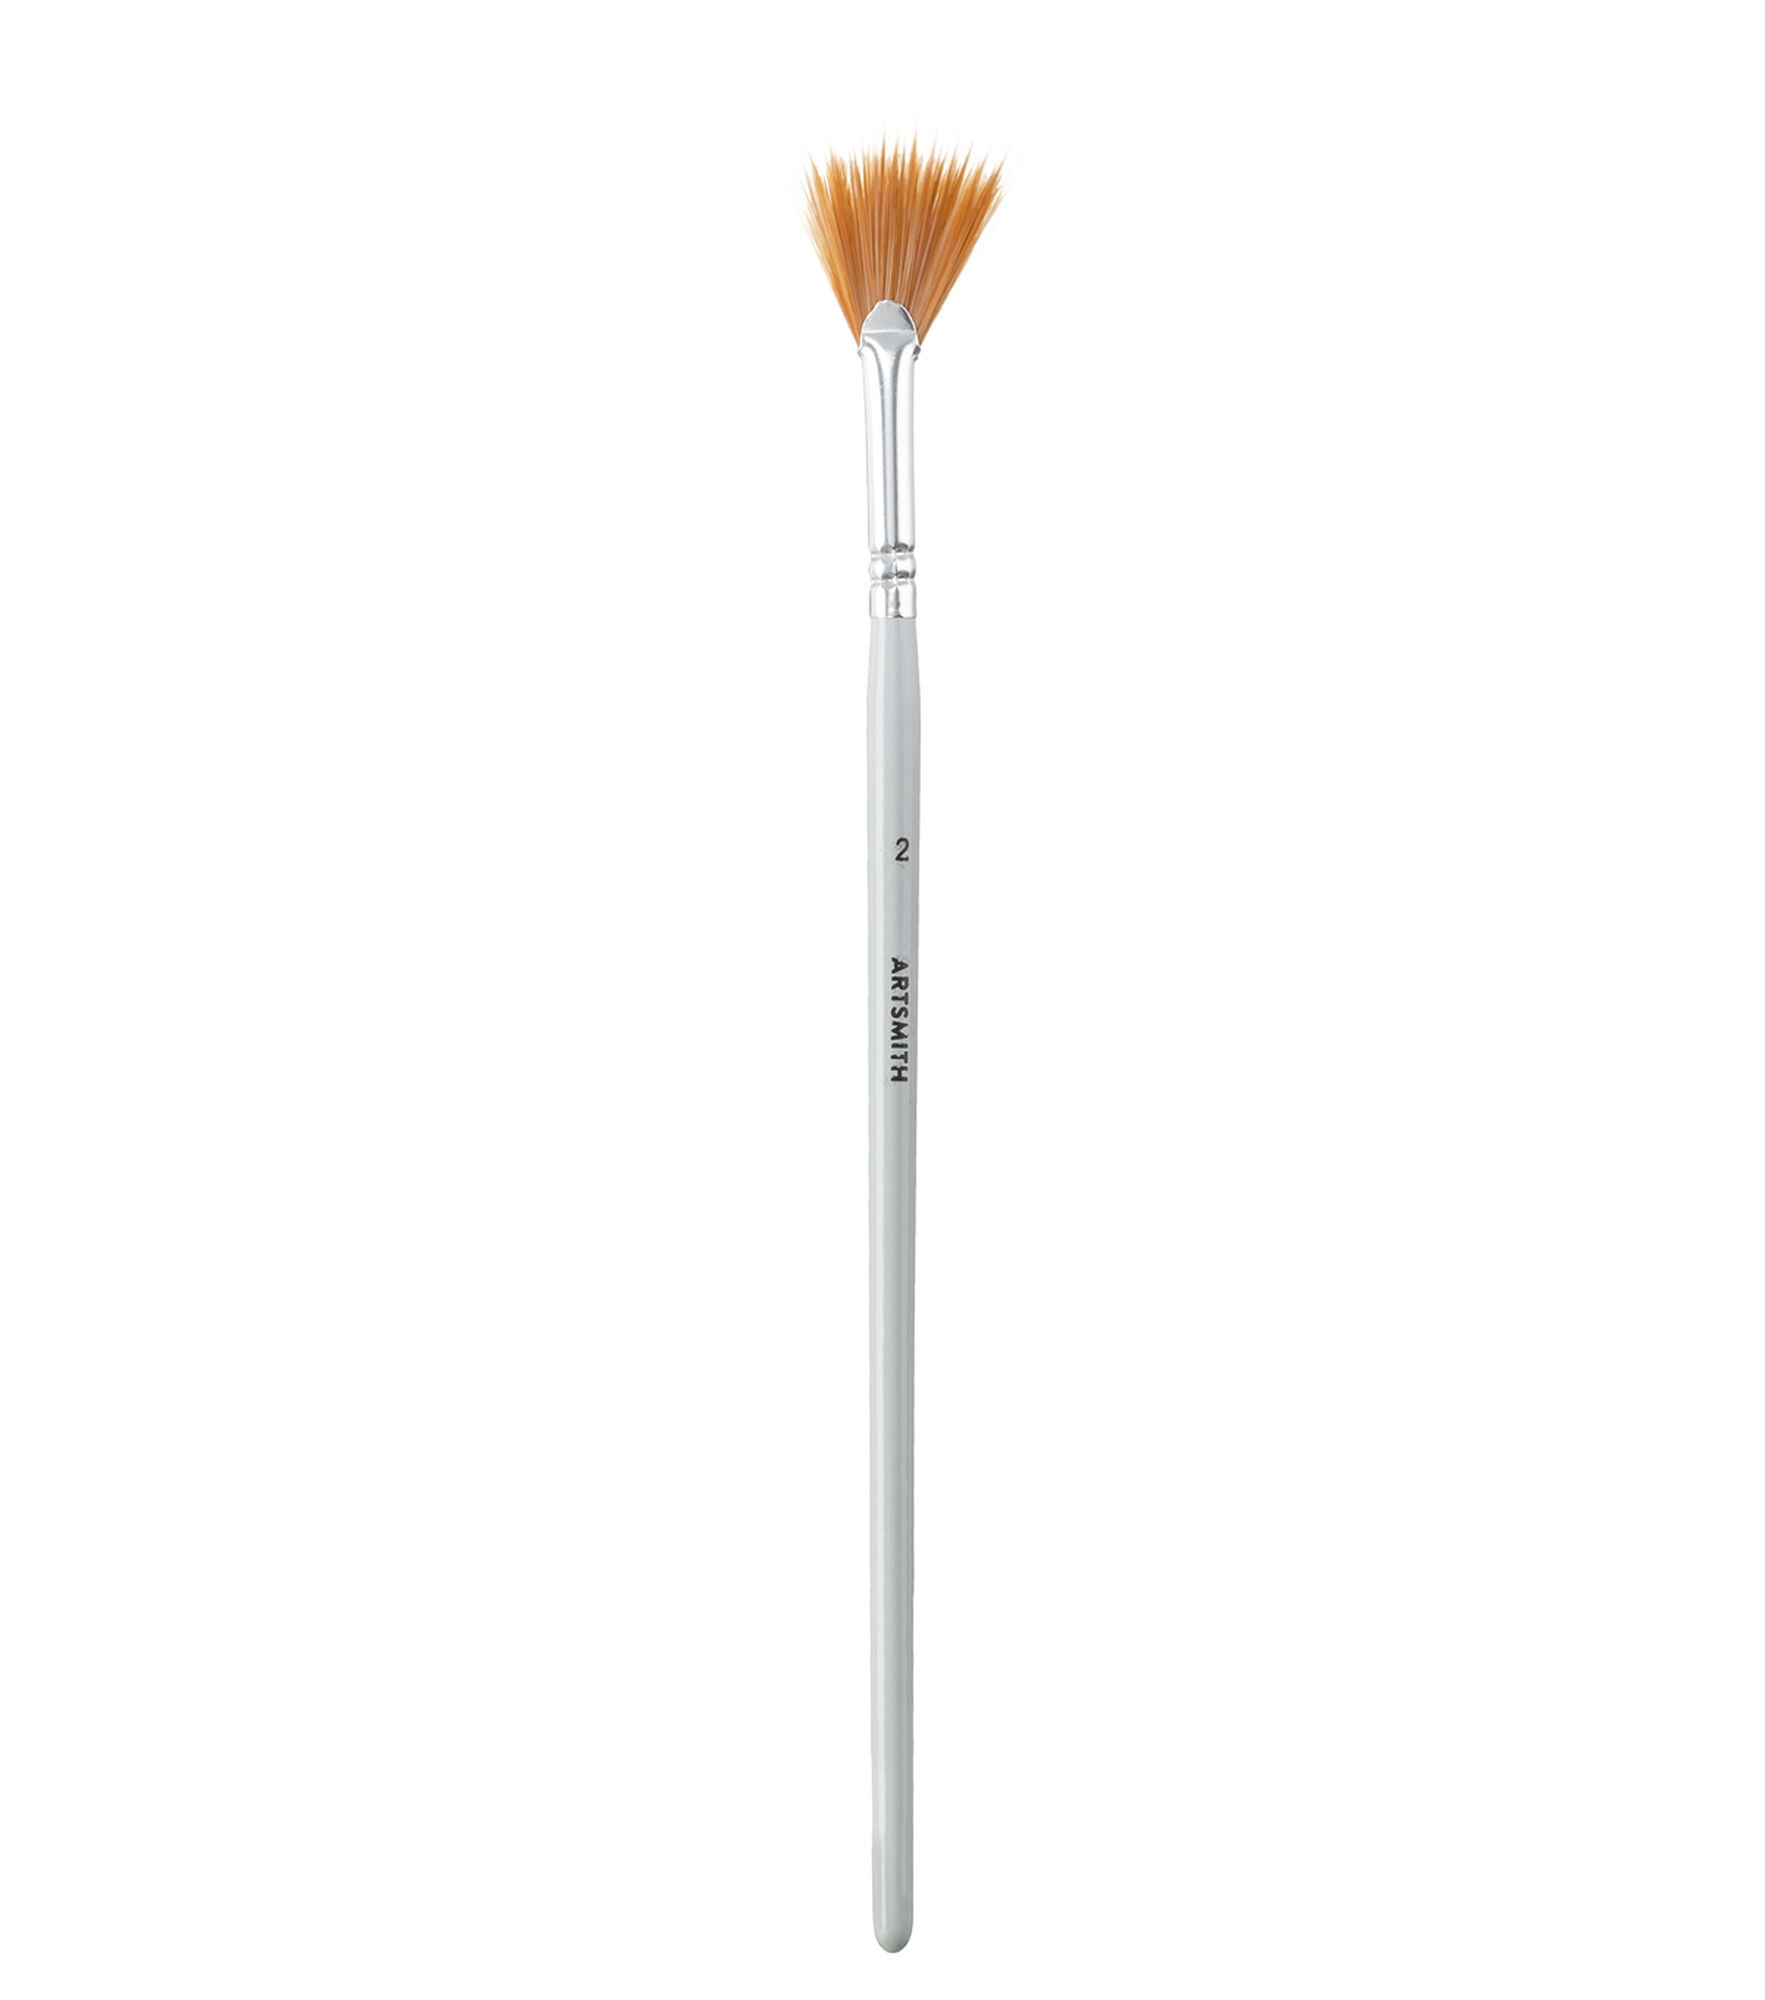 Professional Synthetic #2 Angle Brush by Artsmith